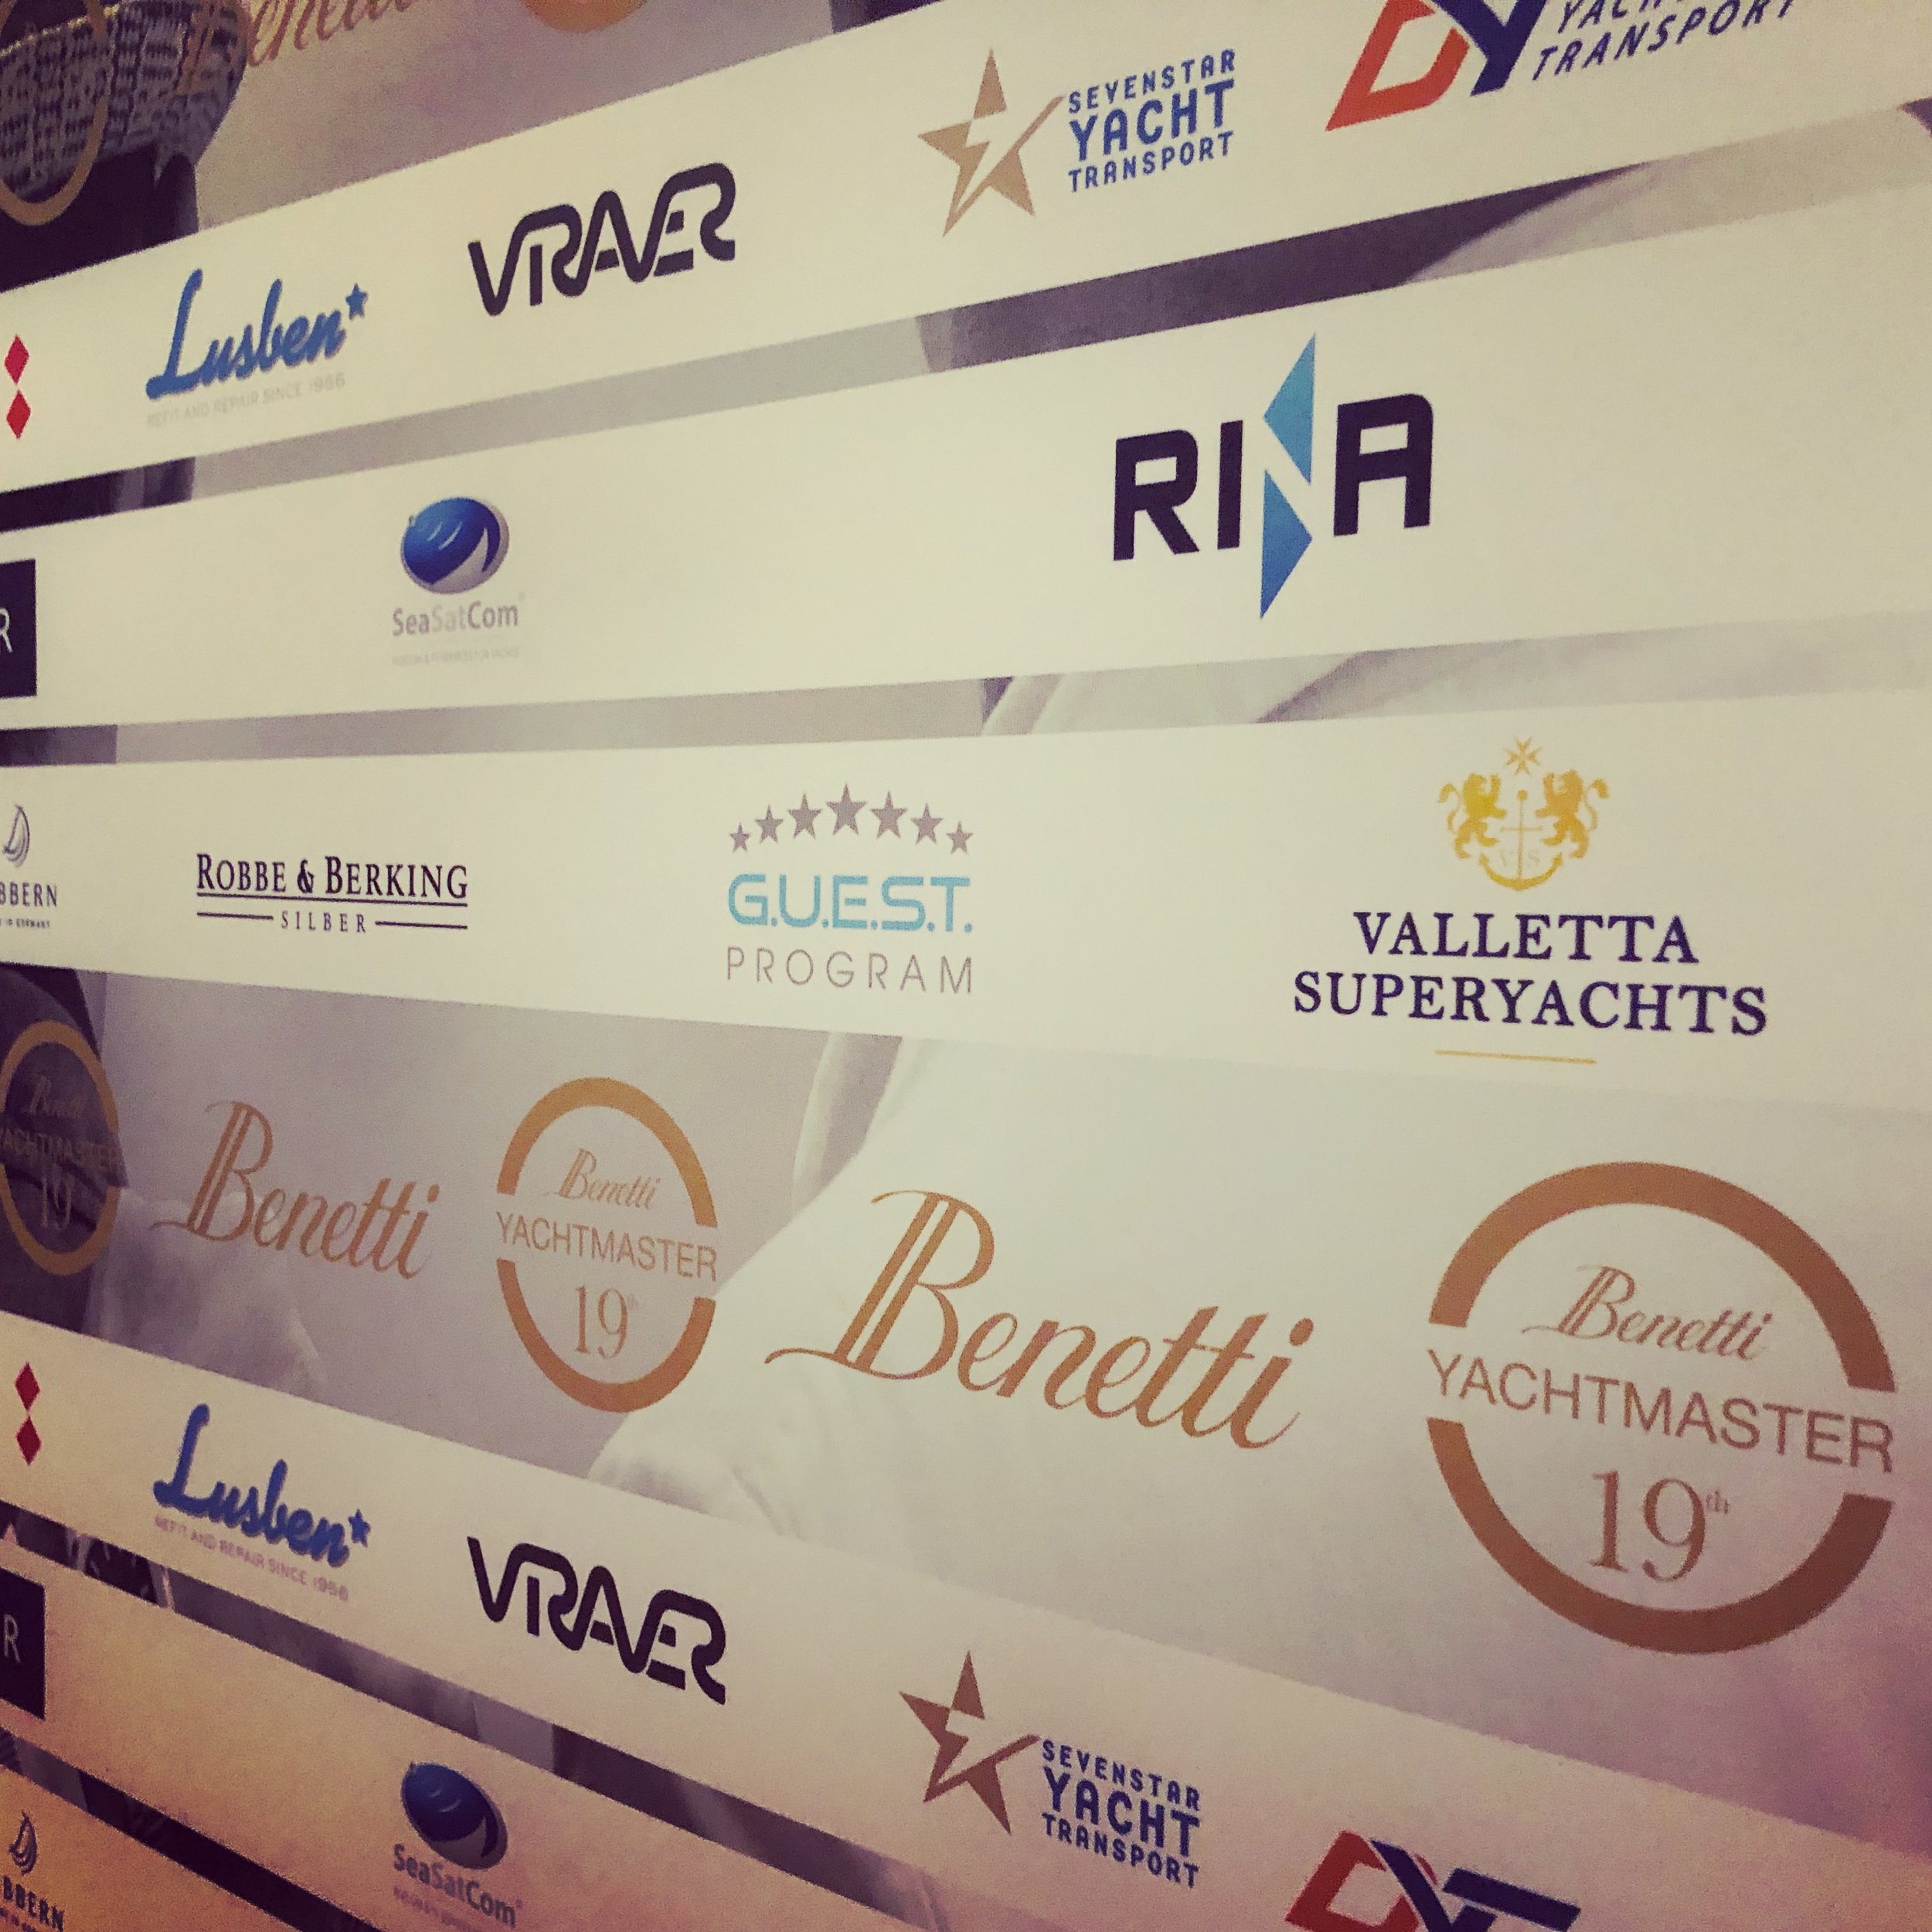 Valletta Superyachts in good company as guest sponsor at the Benetti Yachtmaster #VLTsuperyachts #benetti #yachtmaster #19edition #YMtuscany19 #flying #maltaflag#credence #vallettasuperyachts #network